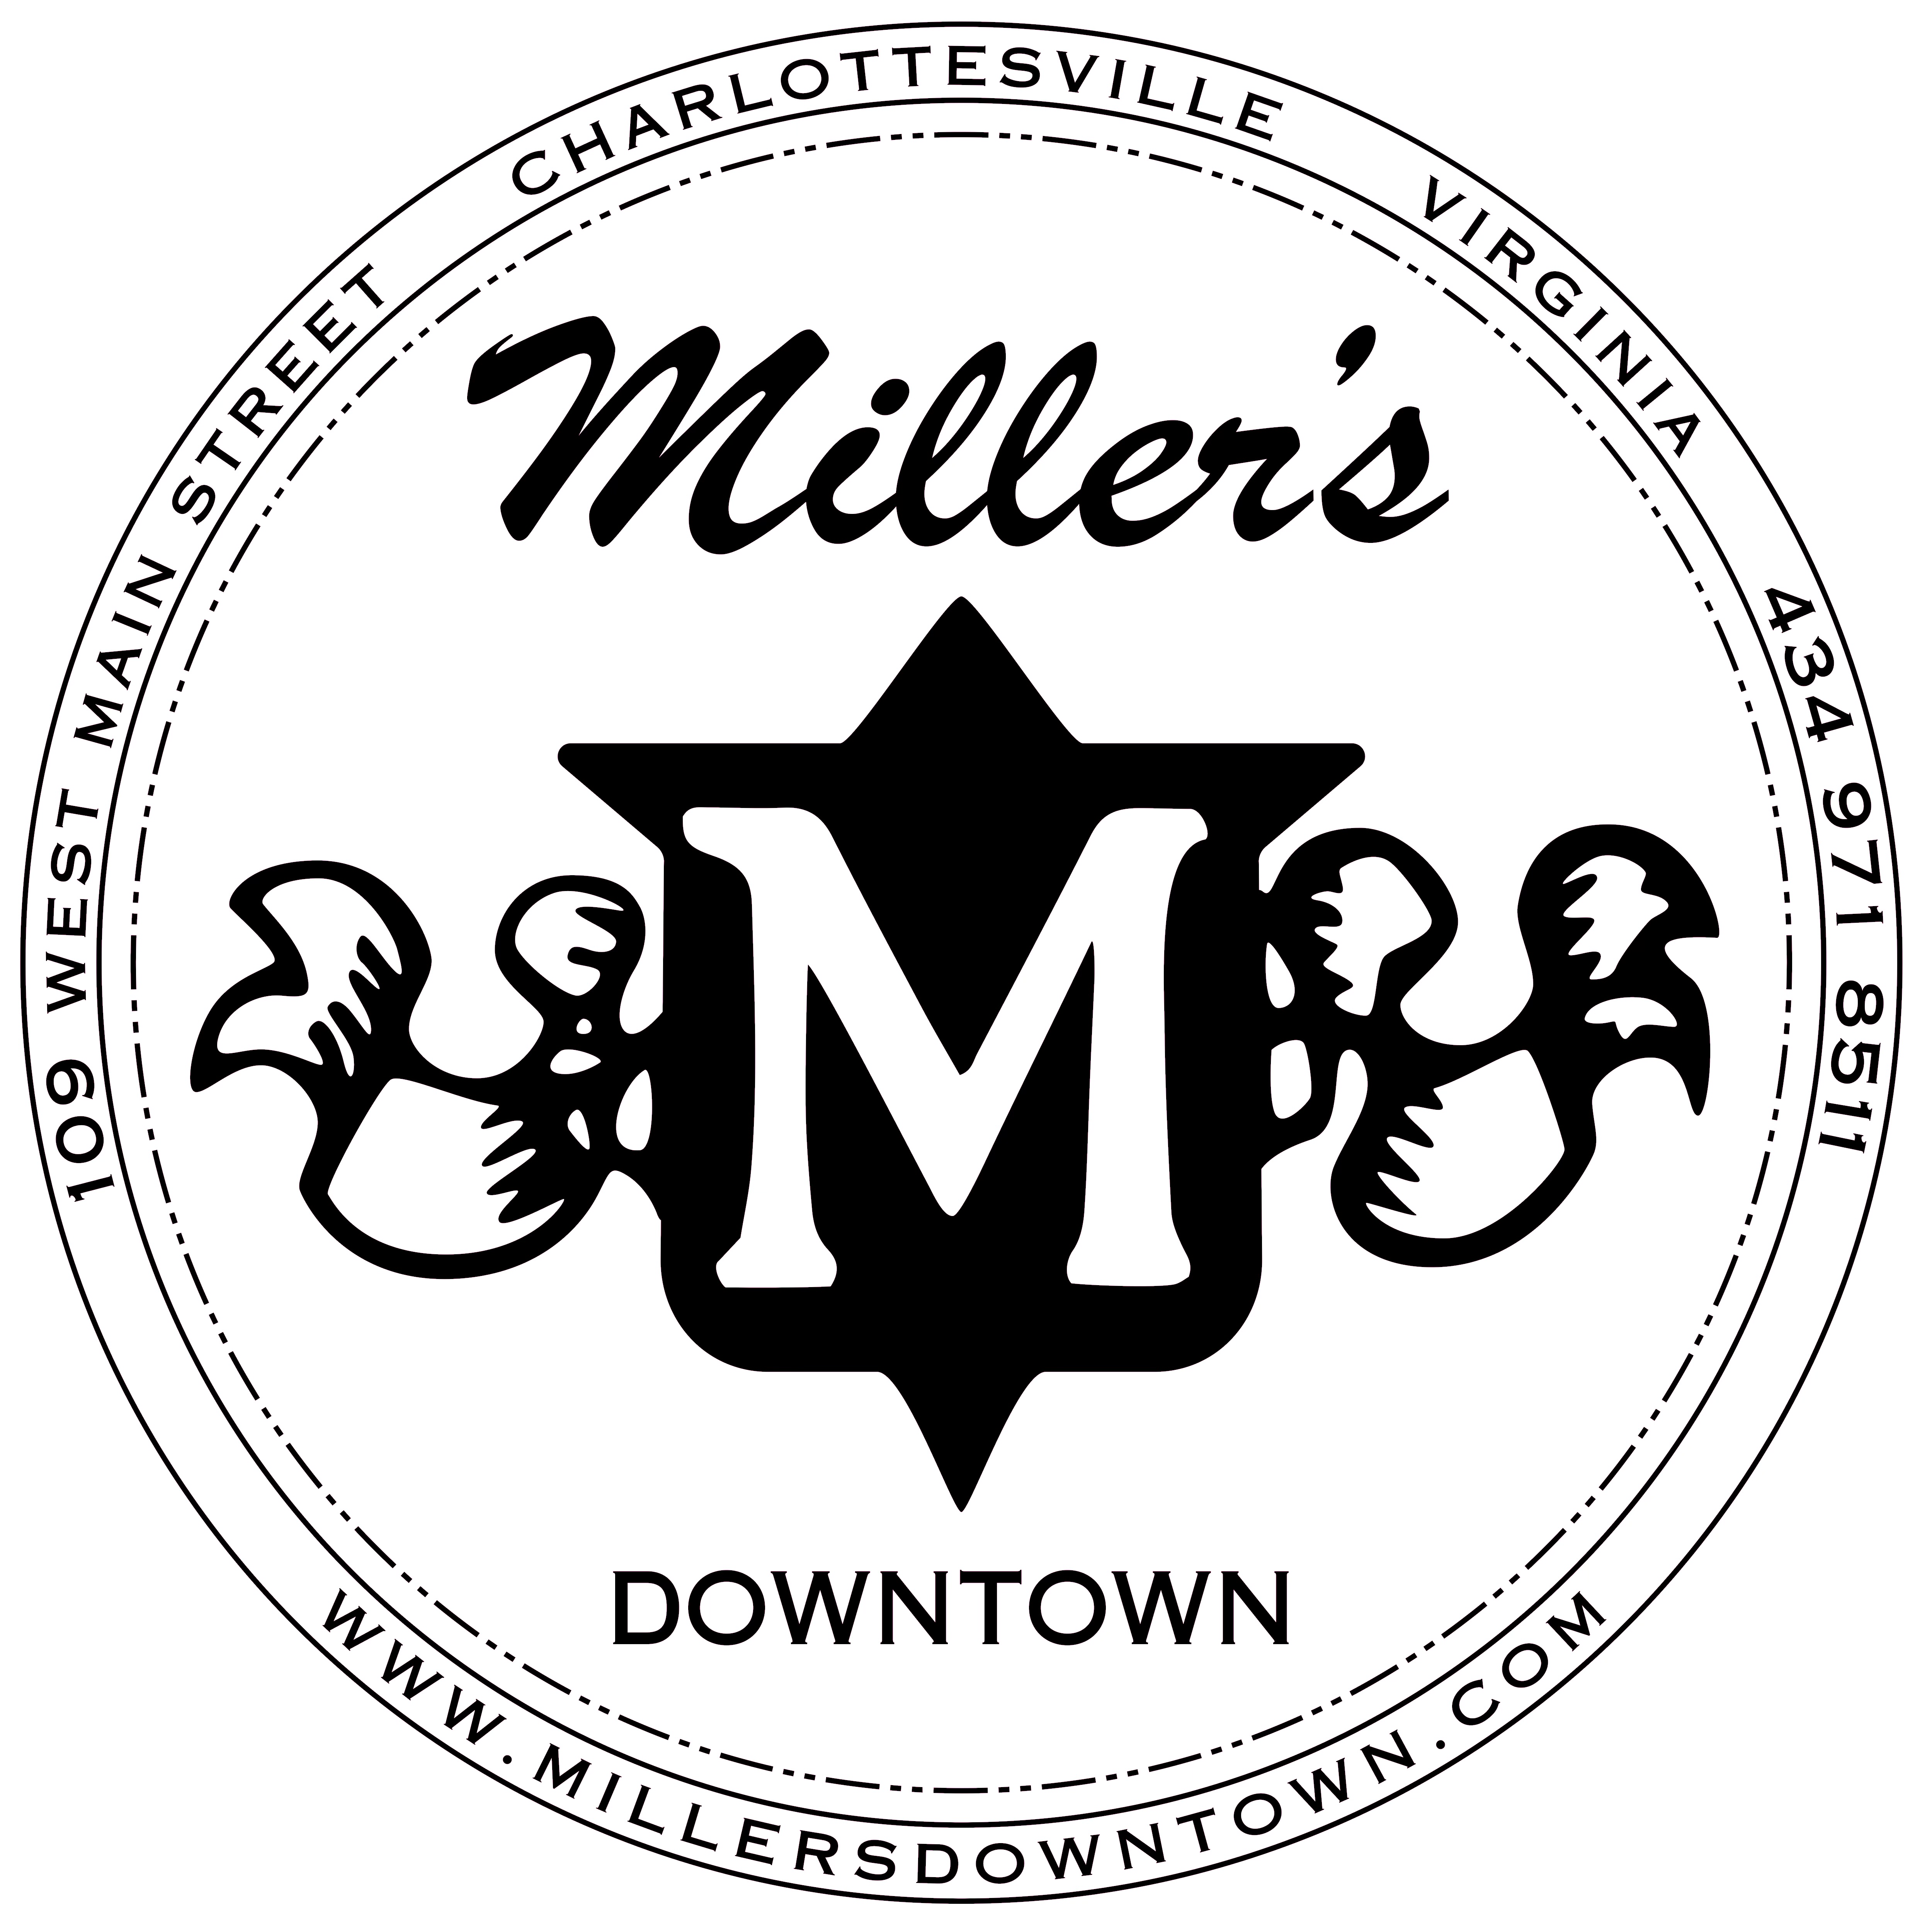 Miller's Downtown